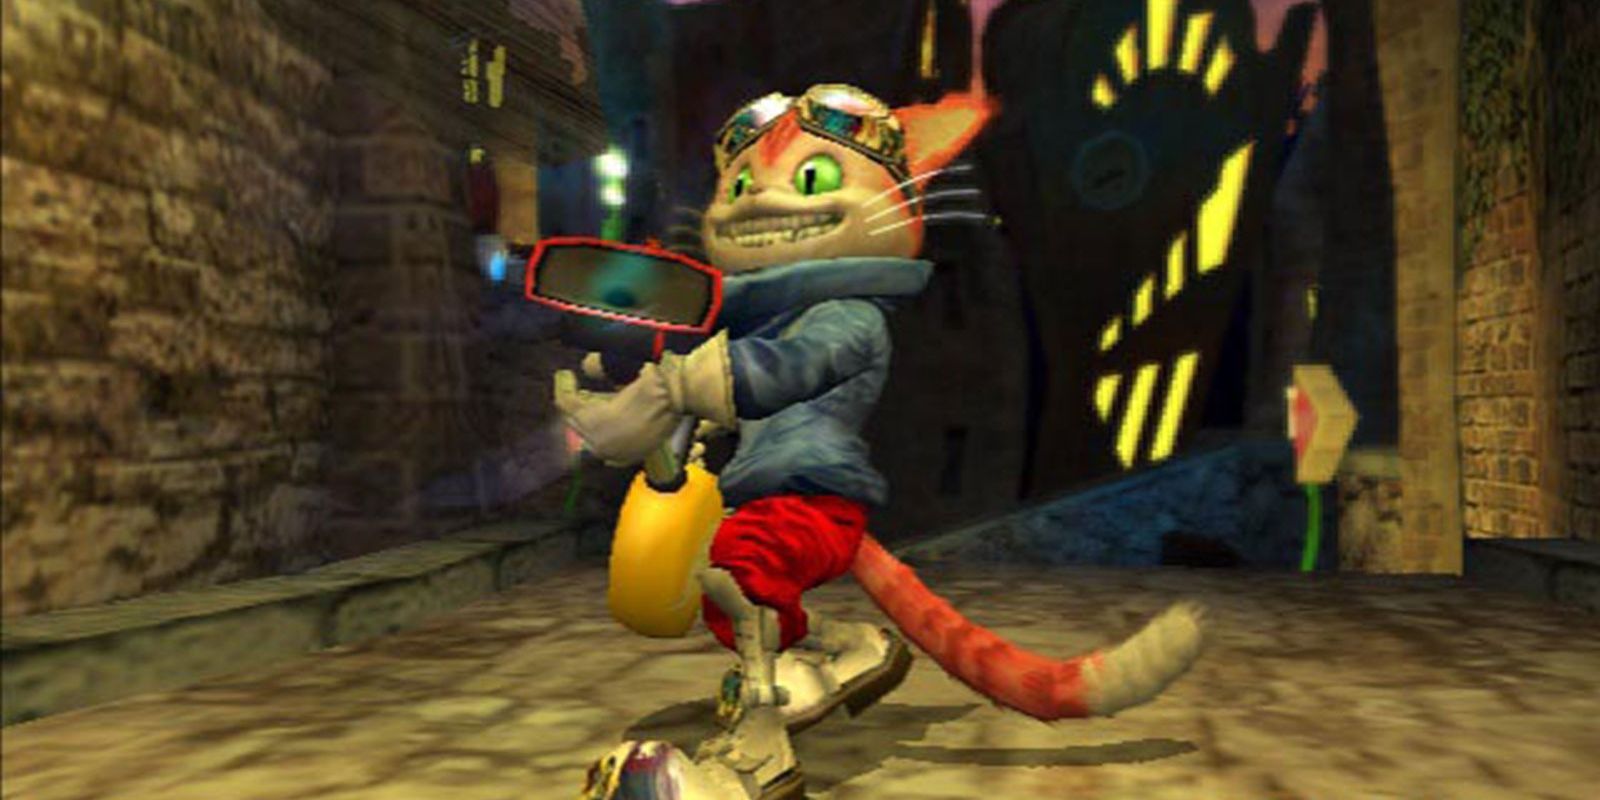 Xbox-Blinx-The-Time-Sweeper-Pose